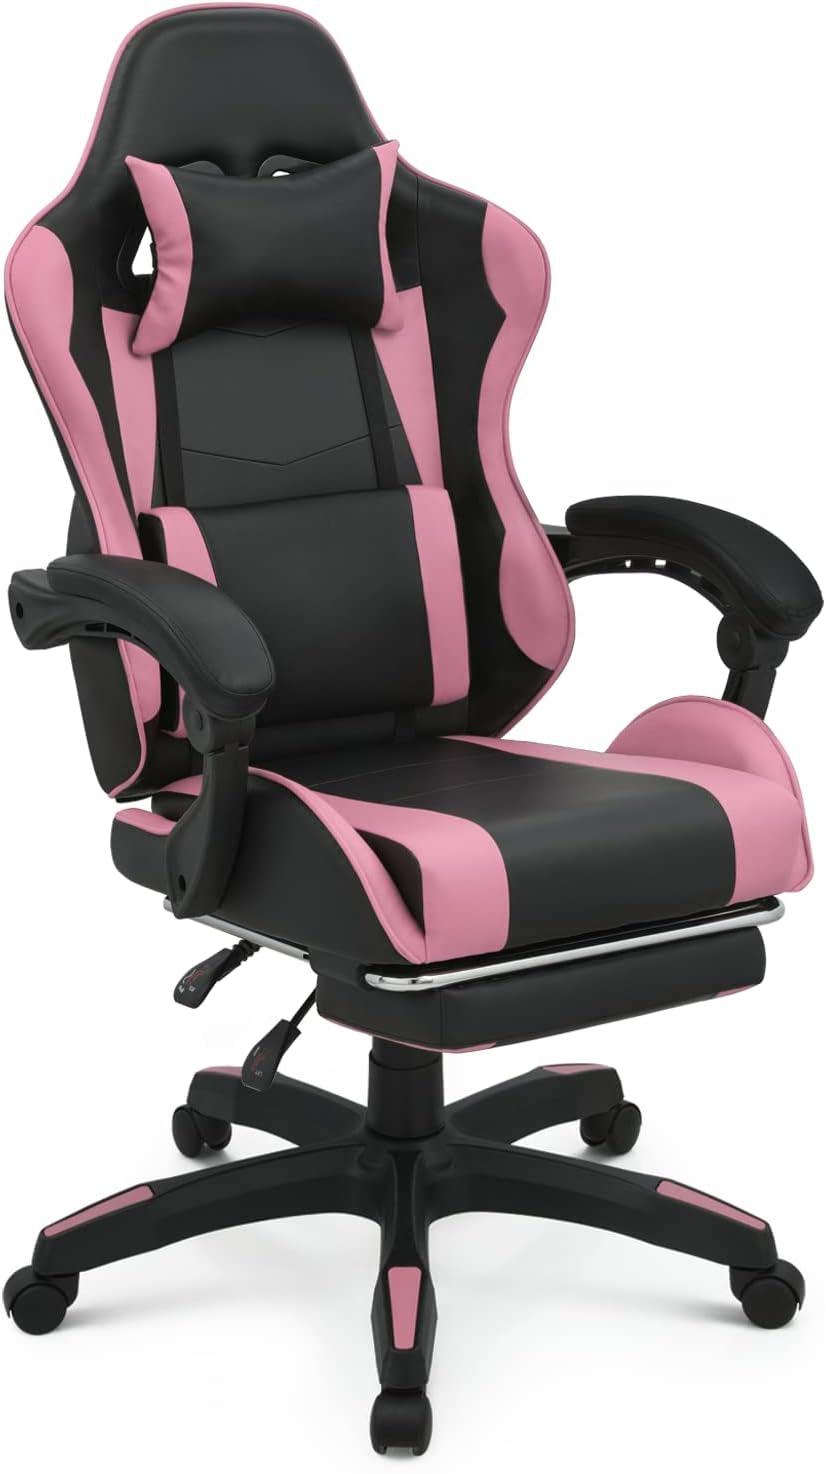 Monibloom Gaming Chair with Headrest & Lumbar Support Ergonomic Computer Racing Chair with Footrest, Adjustable Hight Leather Swivel Computer Chair for Adult Teen Office or Gaming, Pink